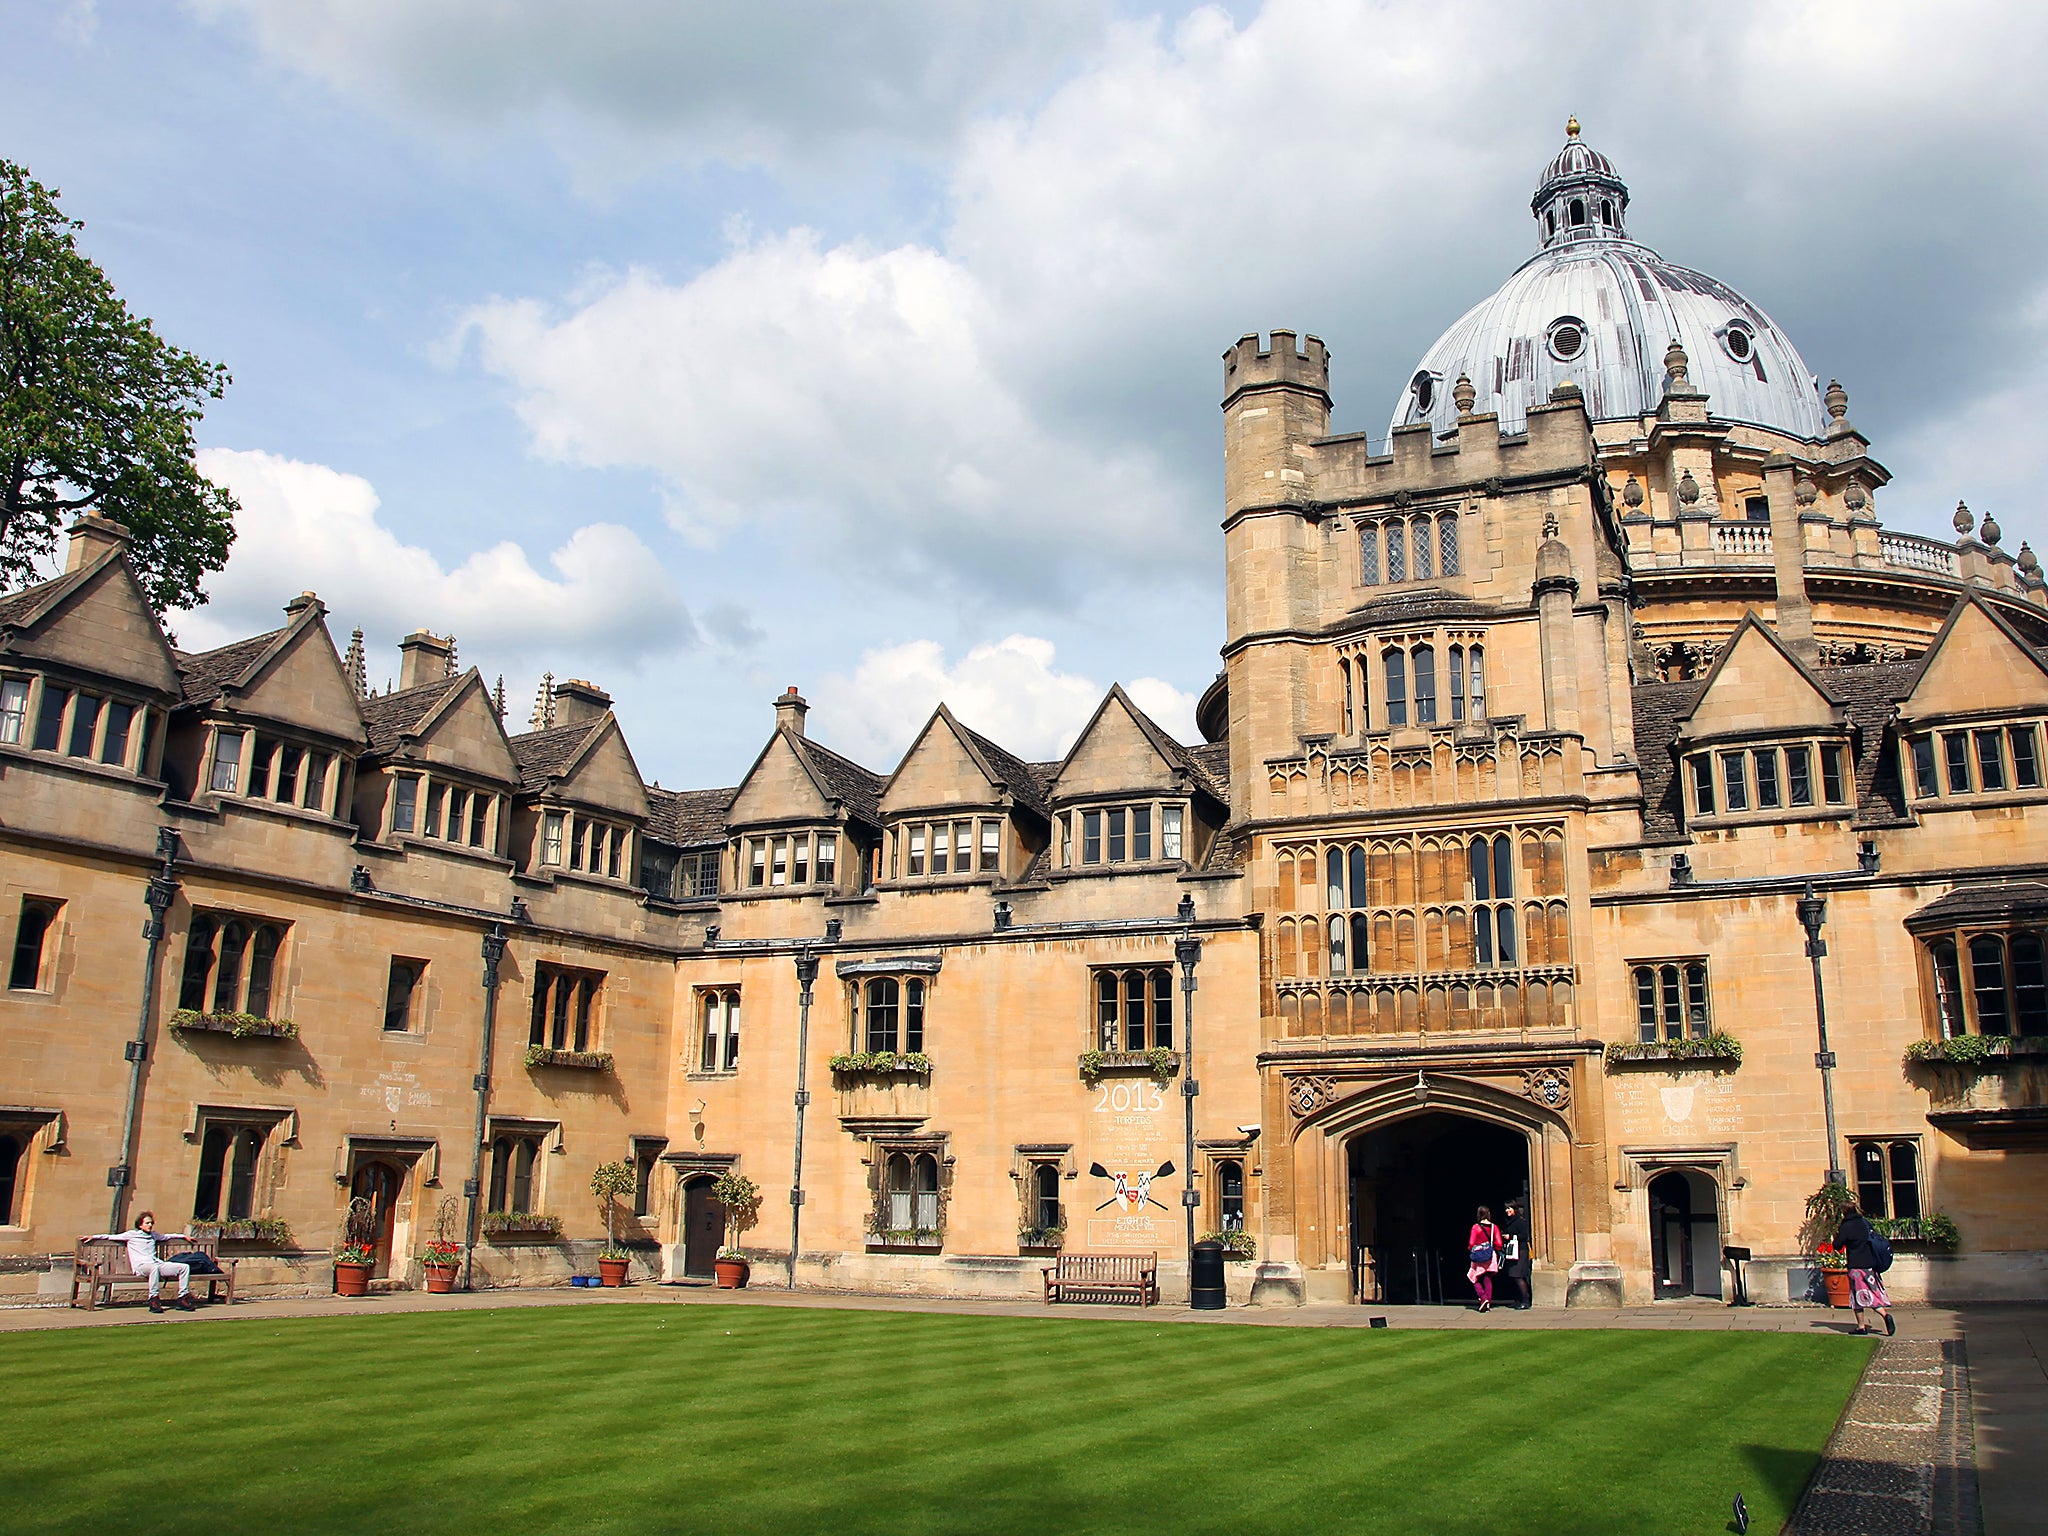 A former Oxford student is claiming for lost earnings based on his 'negligent' teaching while an undergraduate at the university